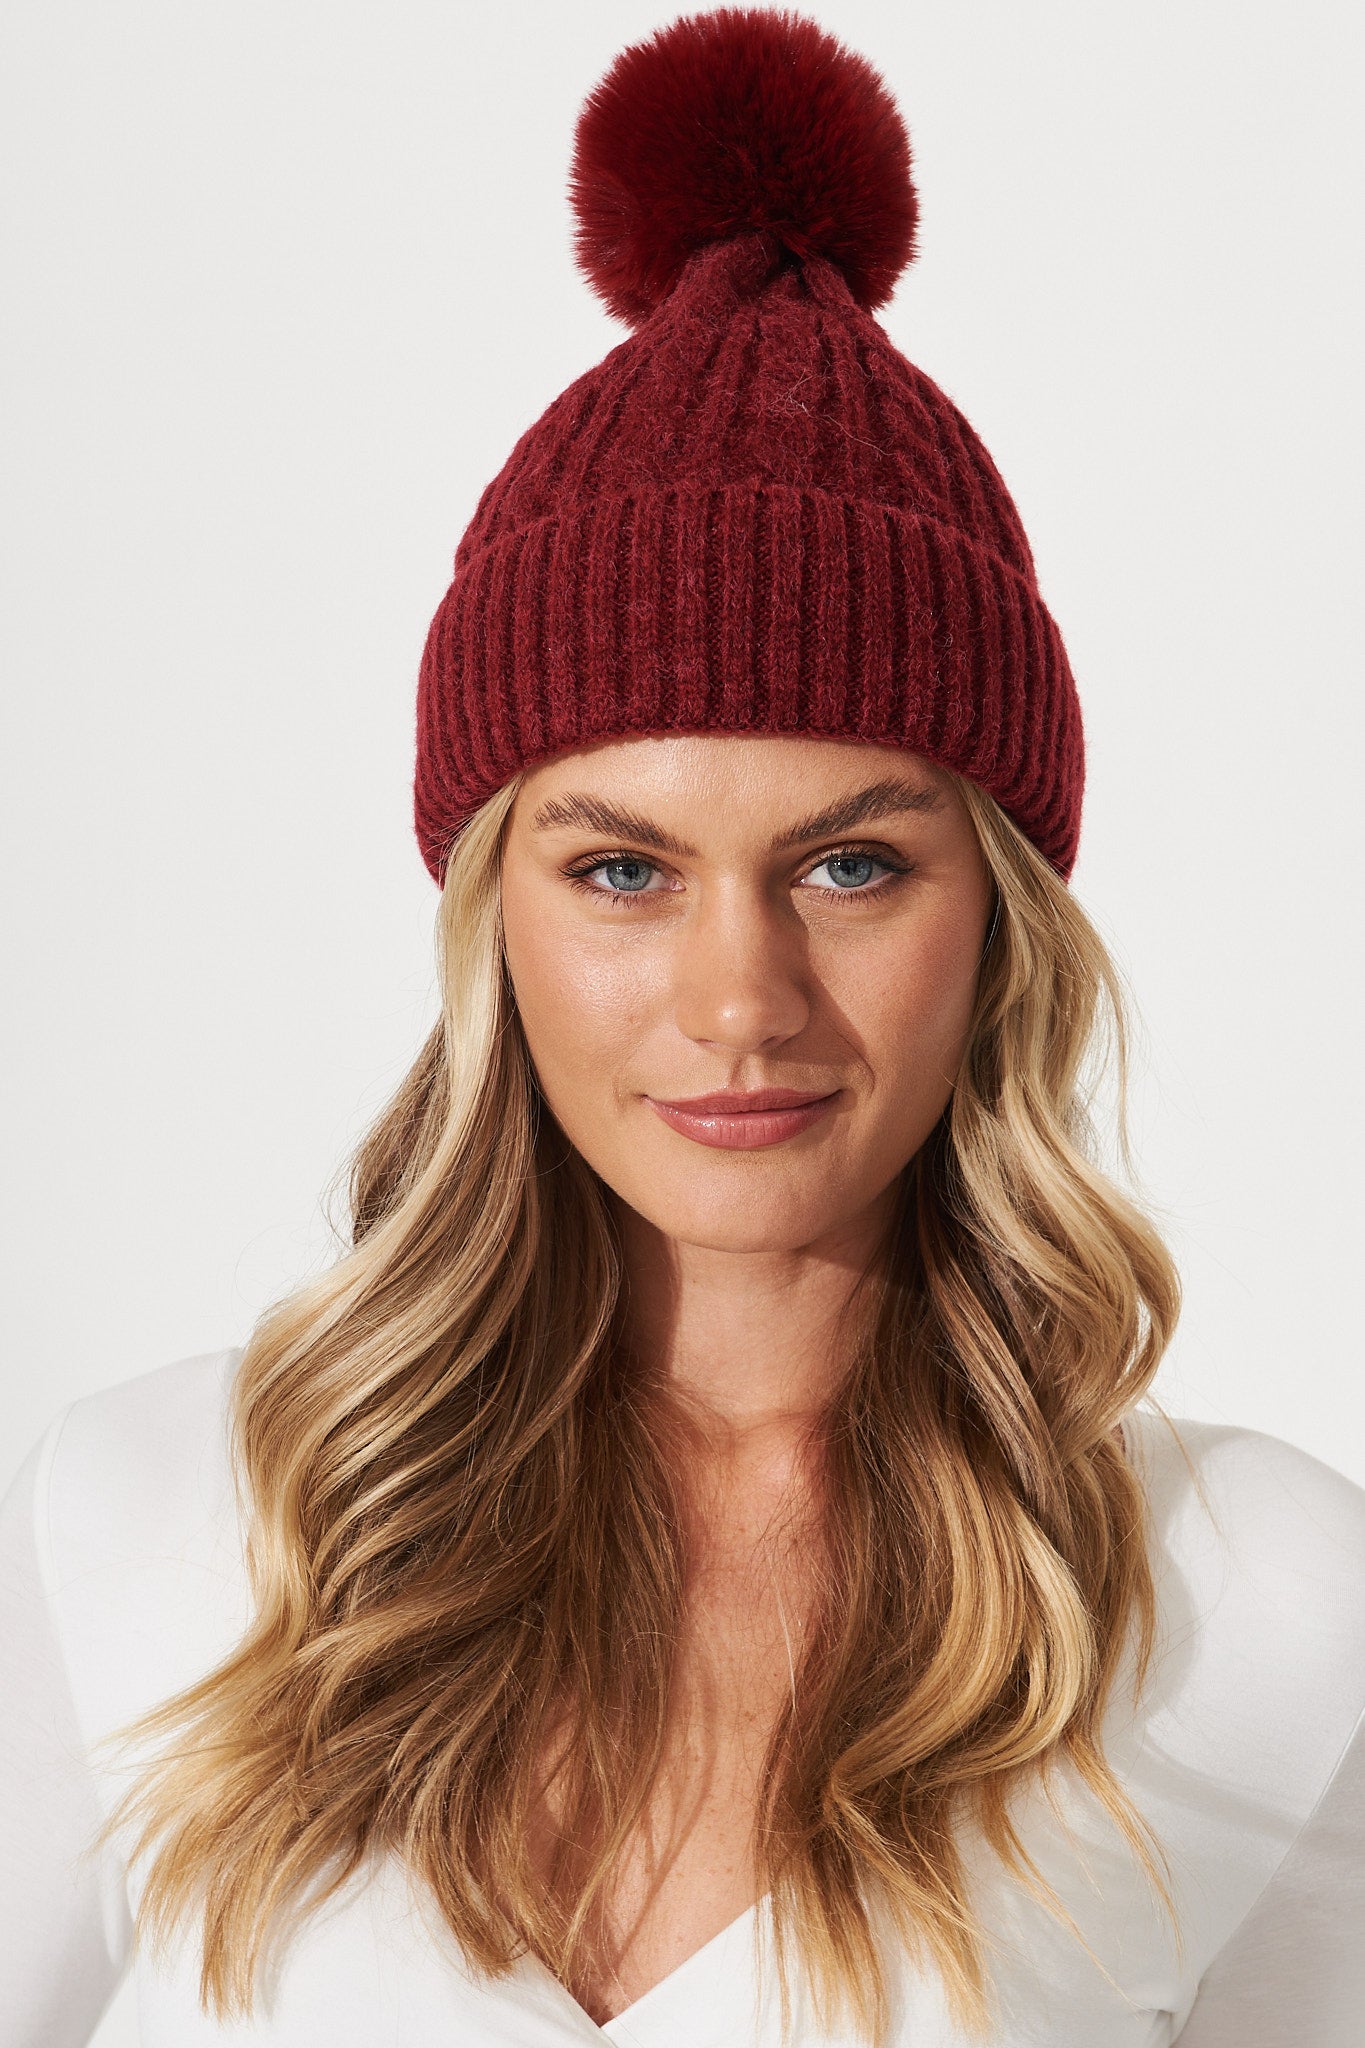 August + Delilah Trace Knit Beanie In Fuchsia With Pom Pom - front